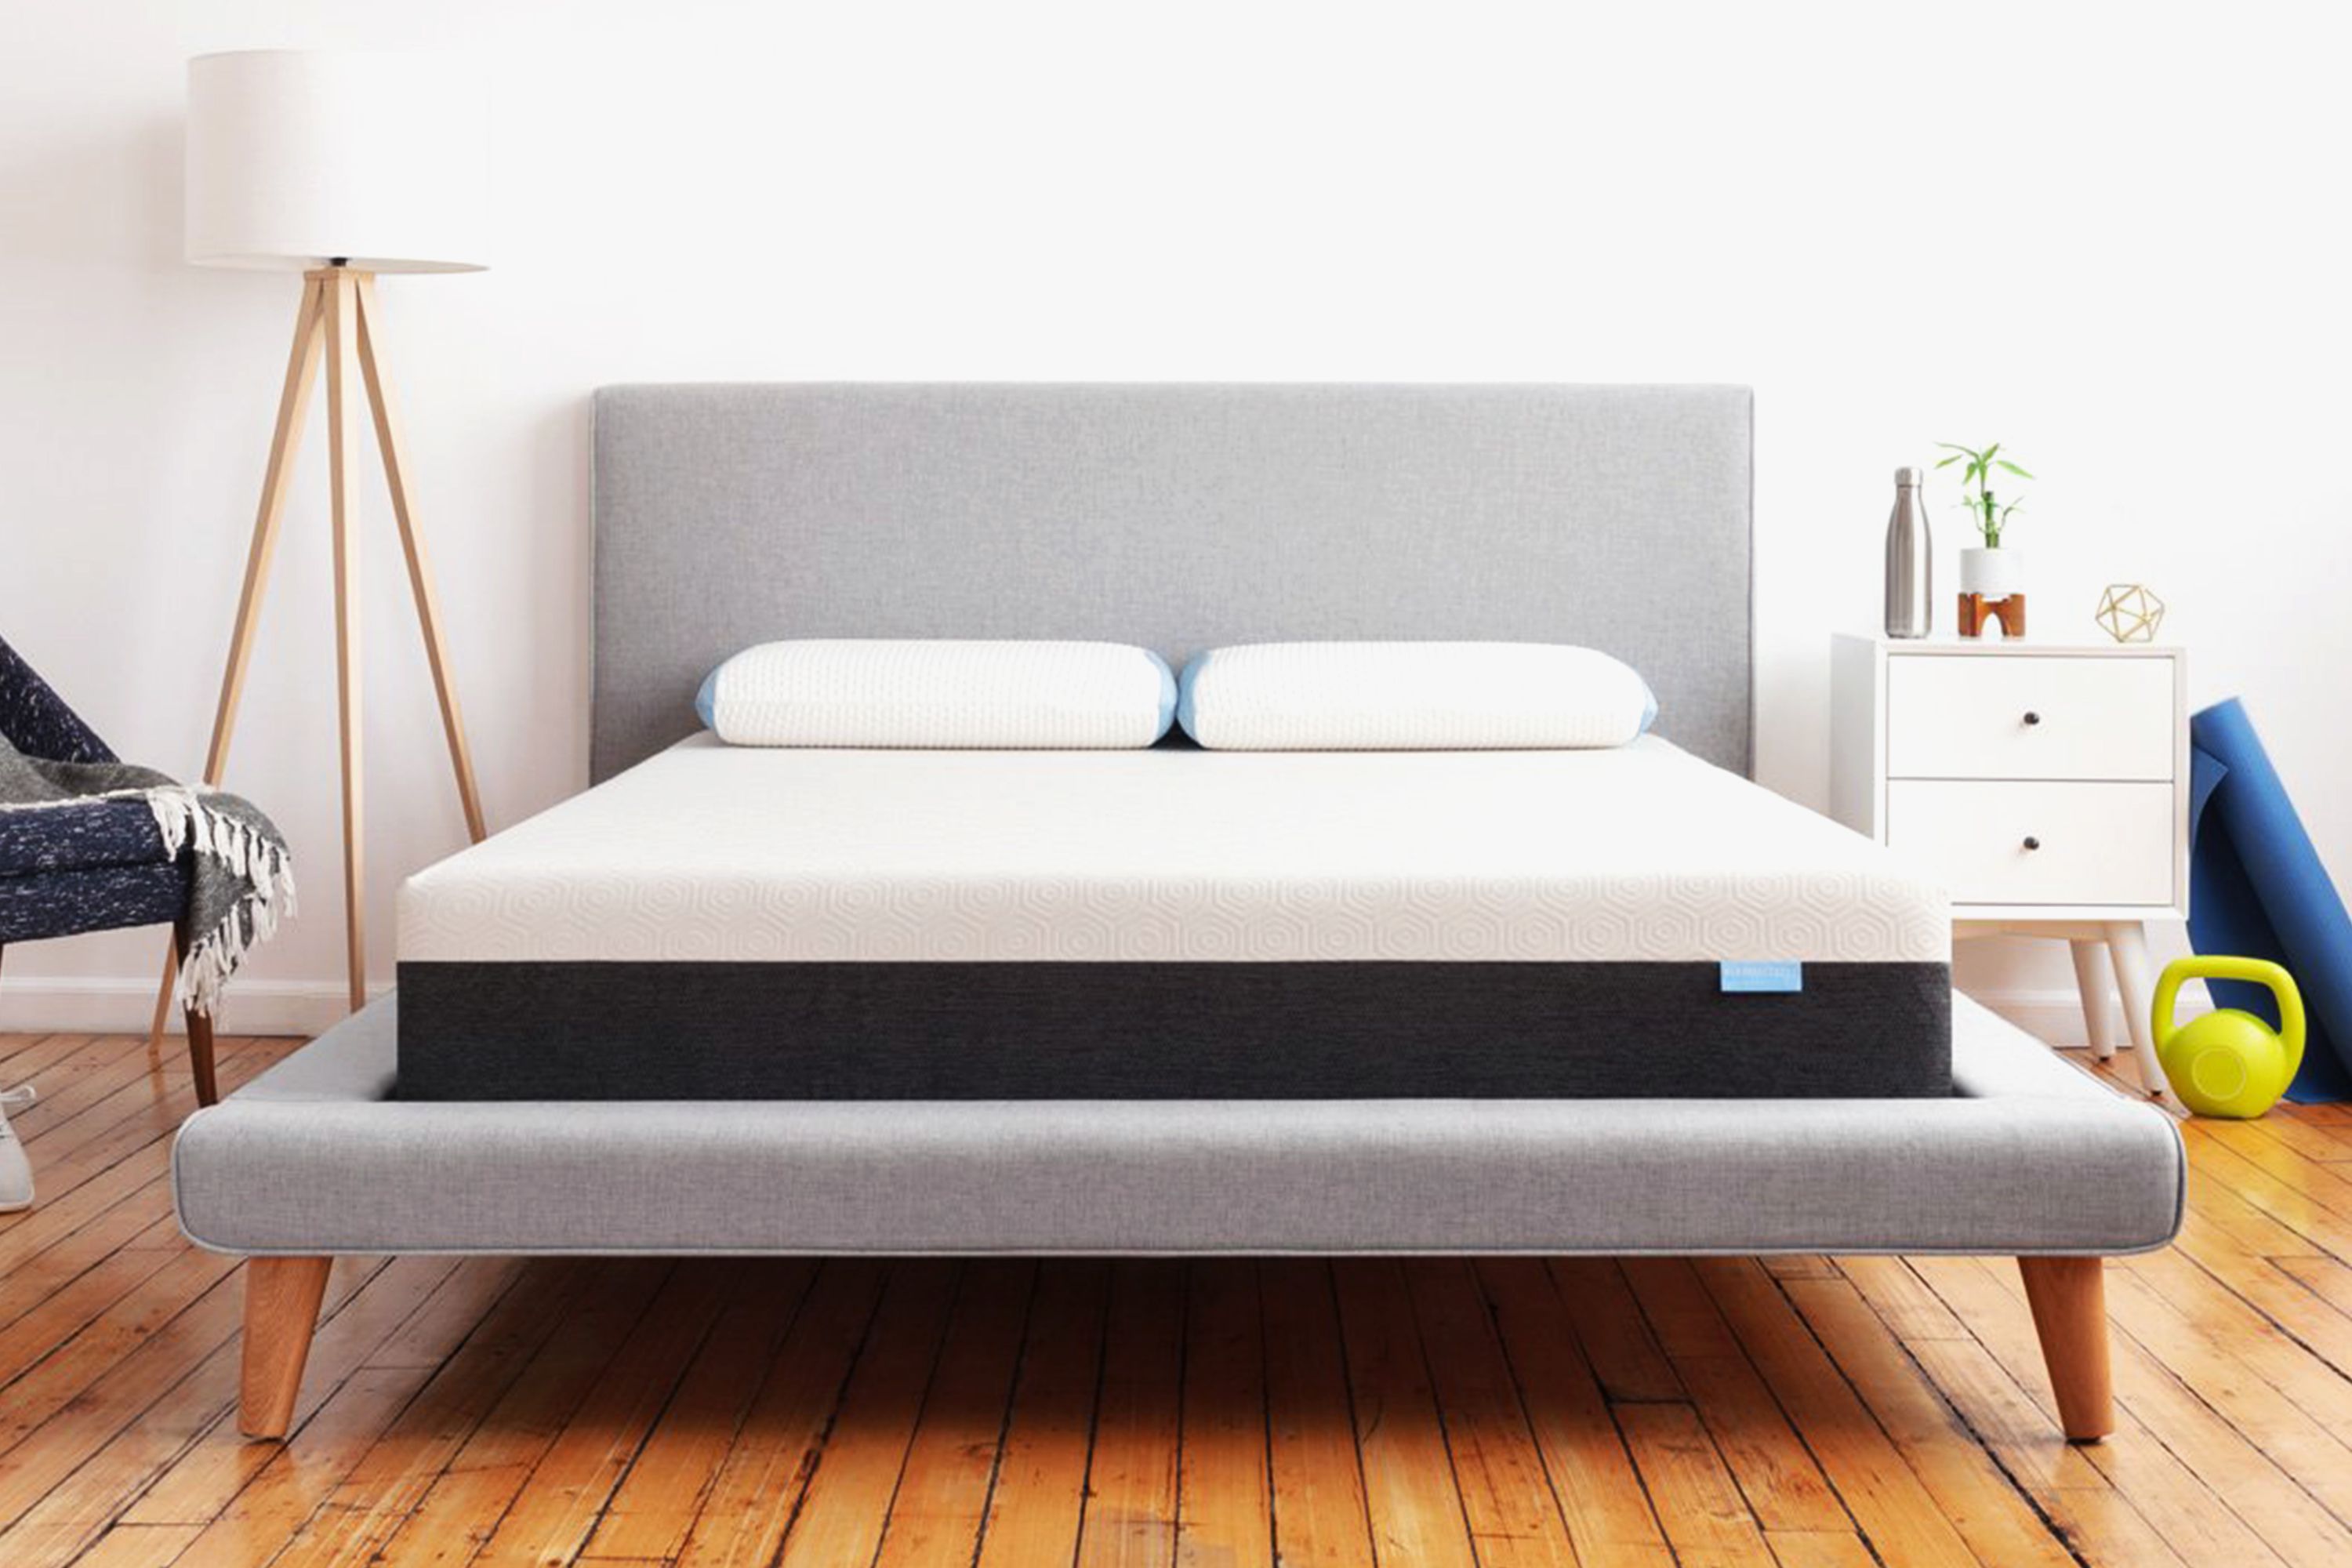 9 Best Mattress in a Box Brands to Buy in 2019 BedinaBox Reviews